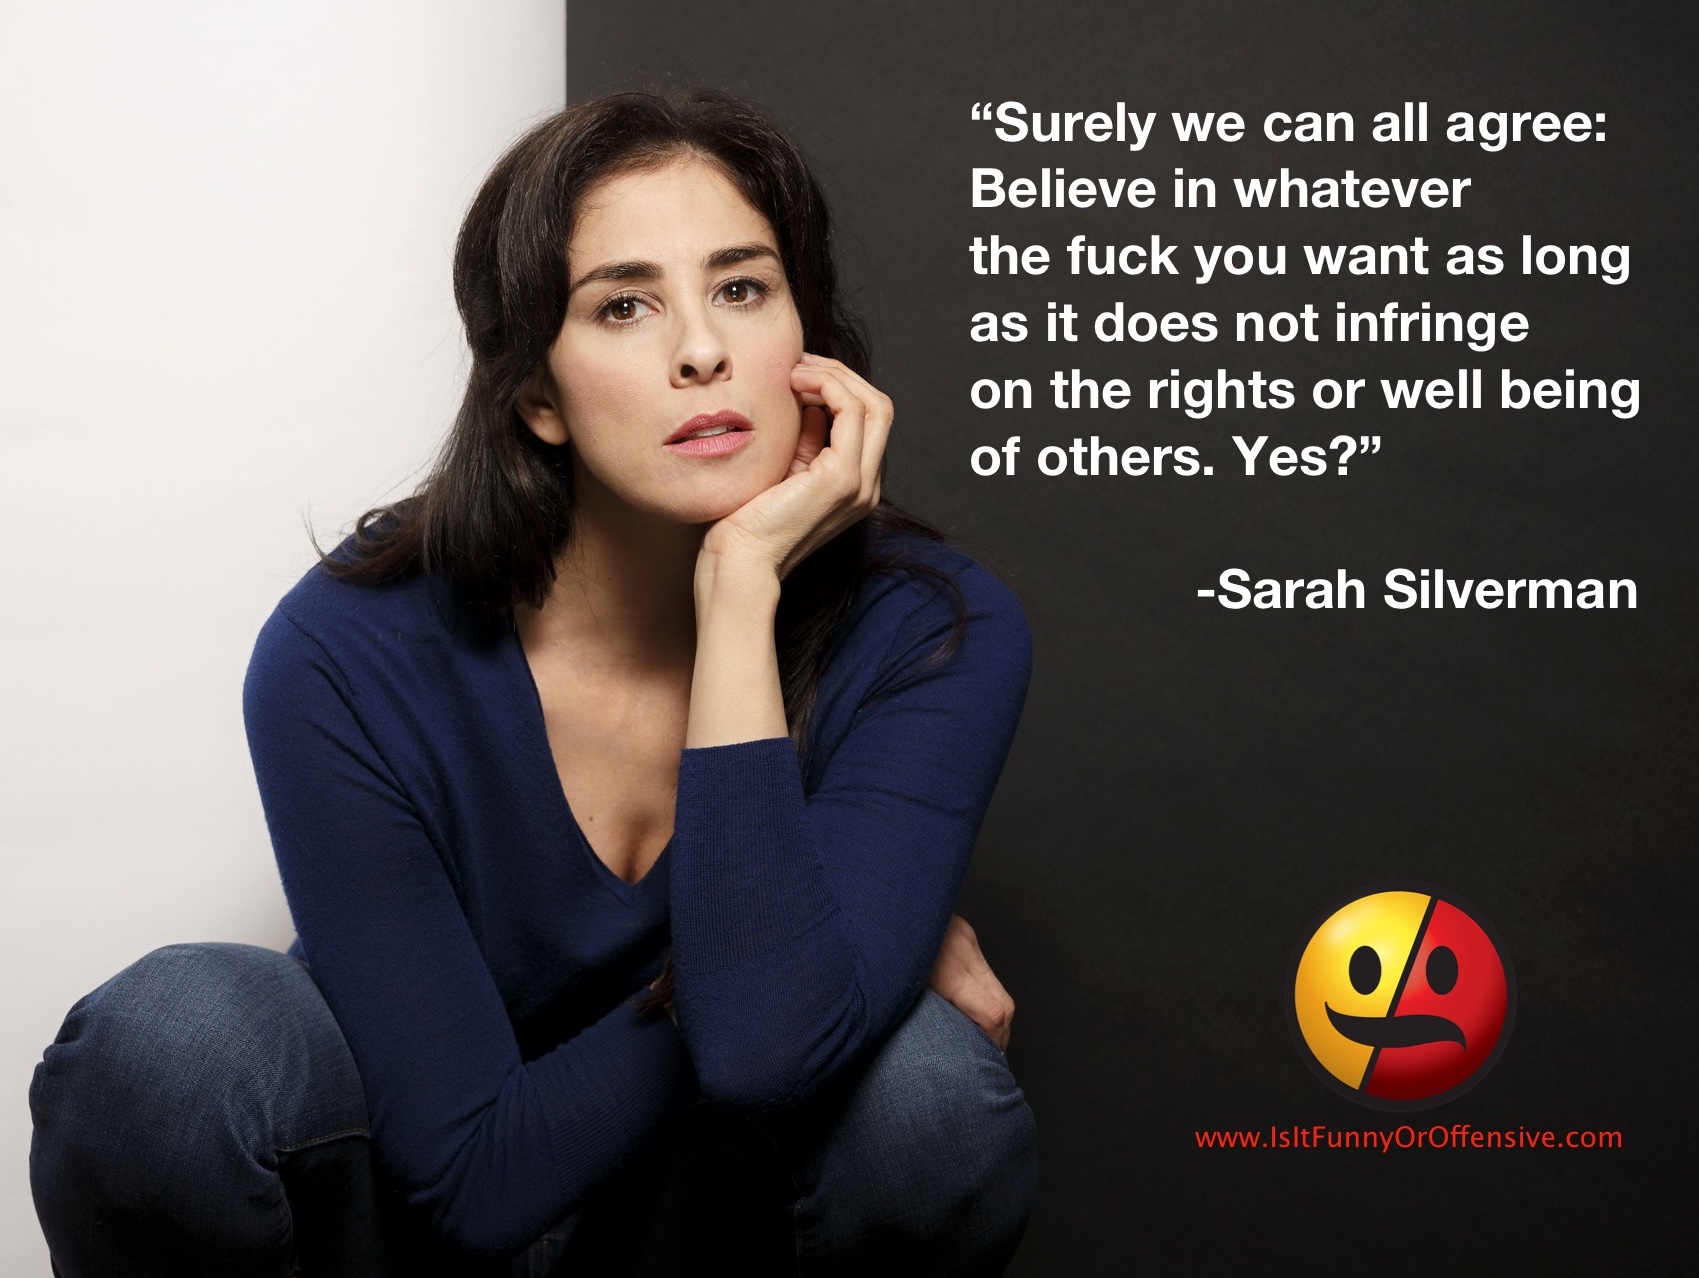 Sarah Silverman on Beliefs and Rights